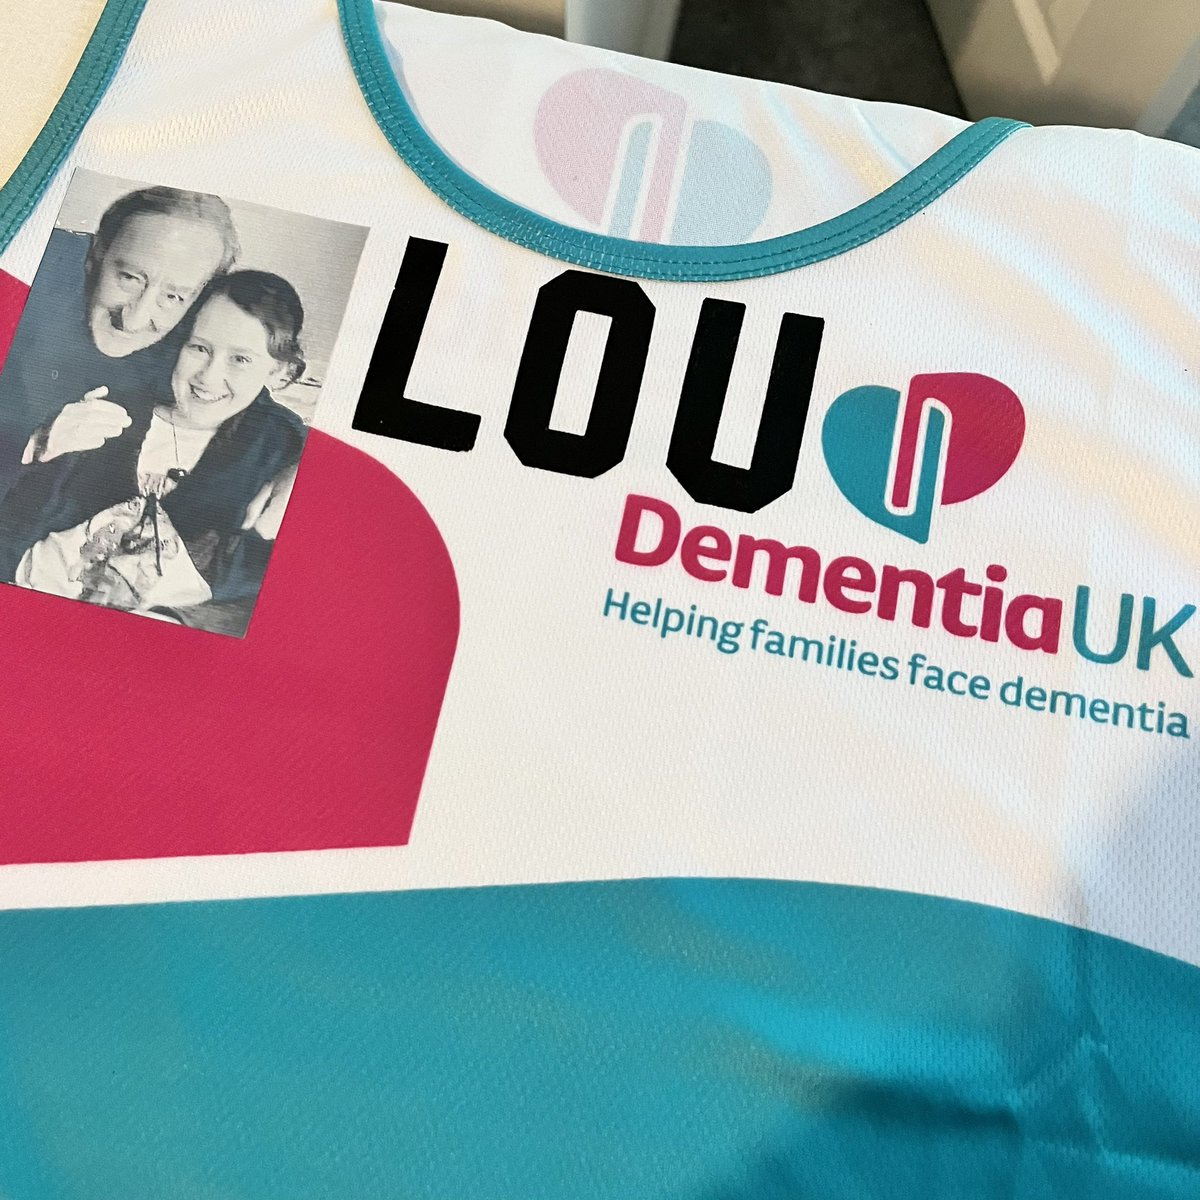 On Sunday I will be running my first ever half marathon. Thank you so much to everyone who has donated to my chosen charity @DementiaUK in memory of my Grandpa & supporting individuals and their families affected by dementia. This one’s for you, Gramps 🏃🏻‍♀️🎀🎽